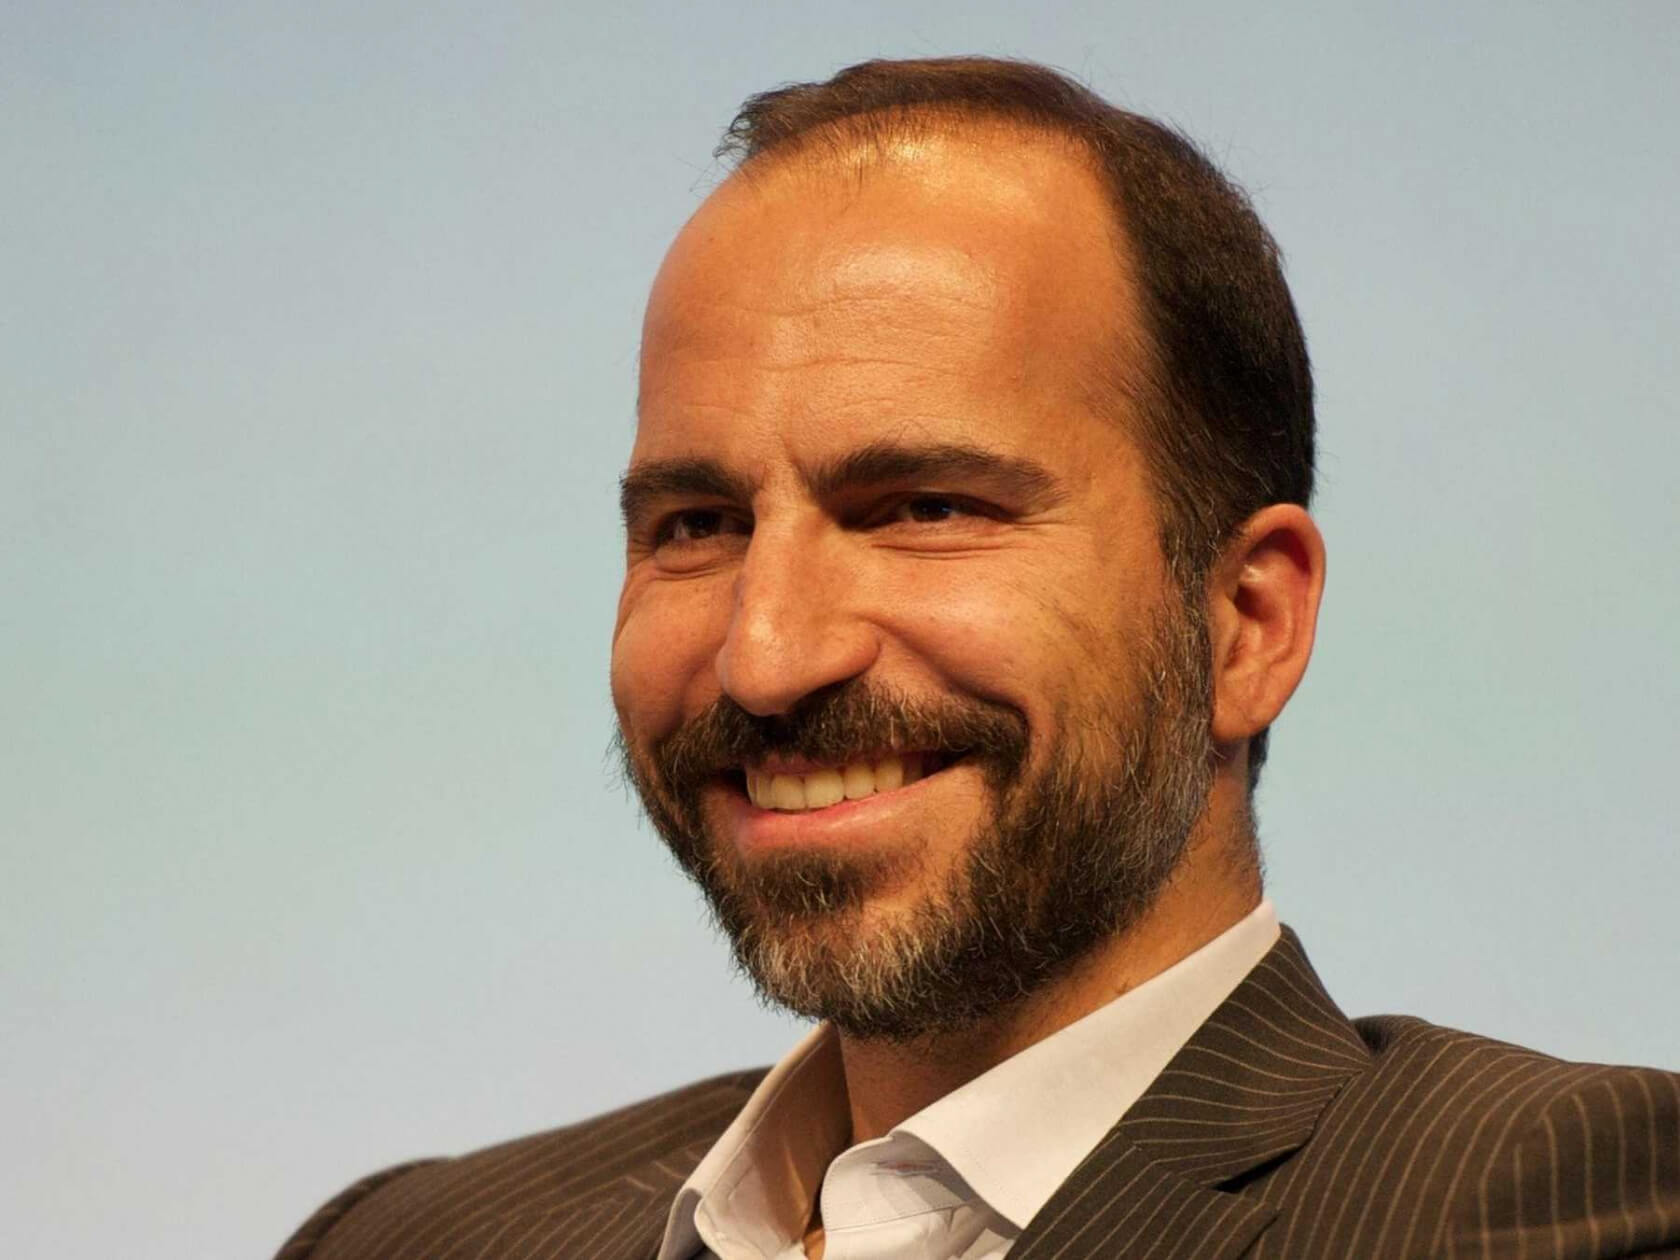 Uber officially announces Dara Khosrowshahi as its new CEO